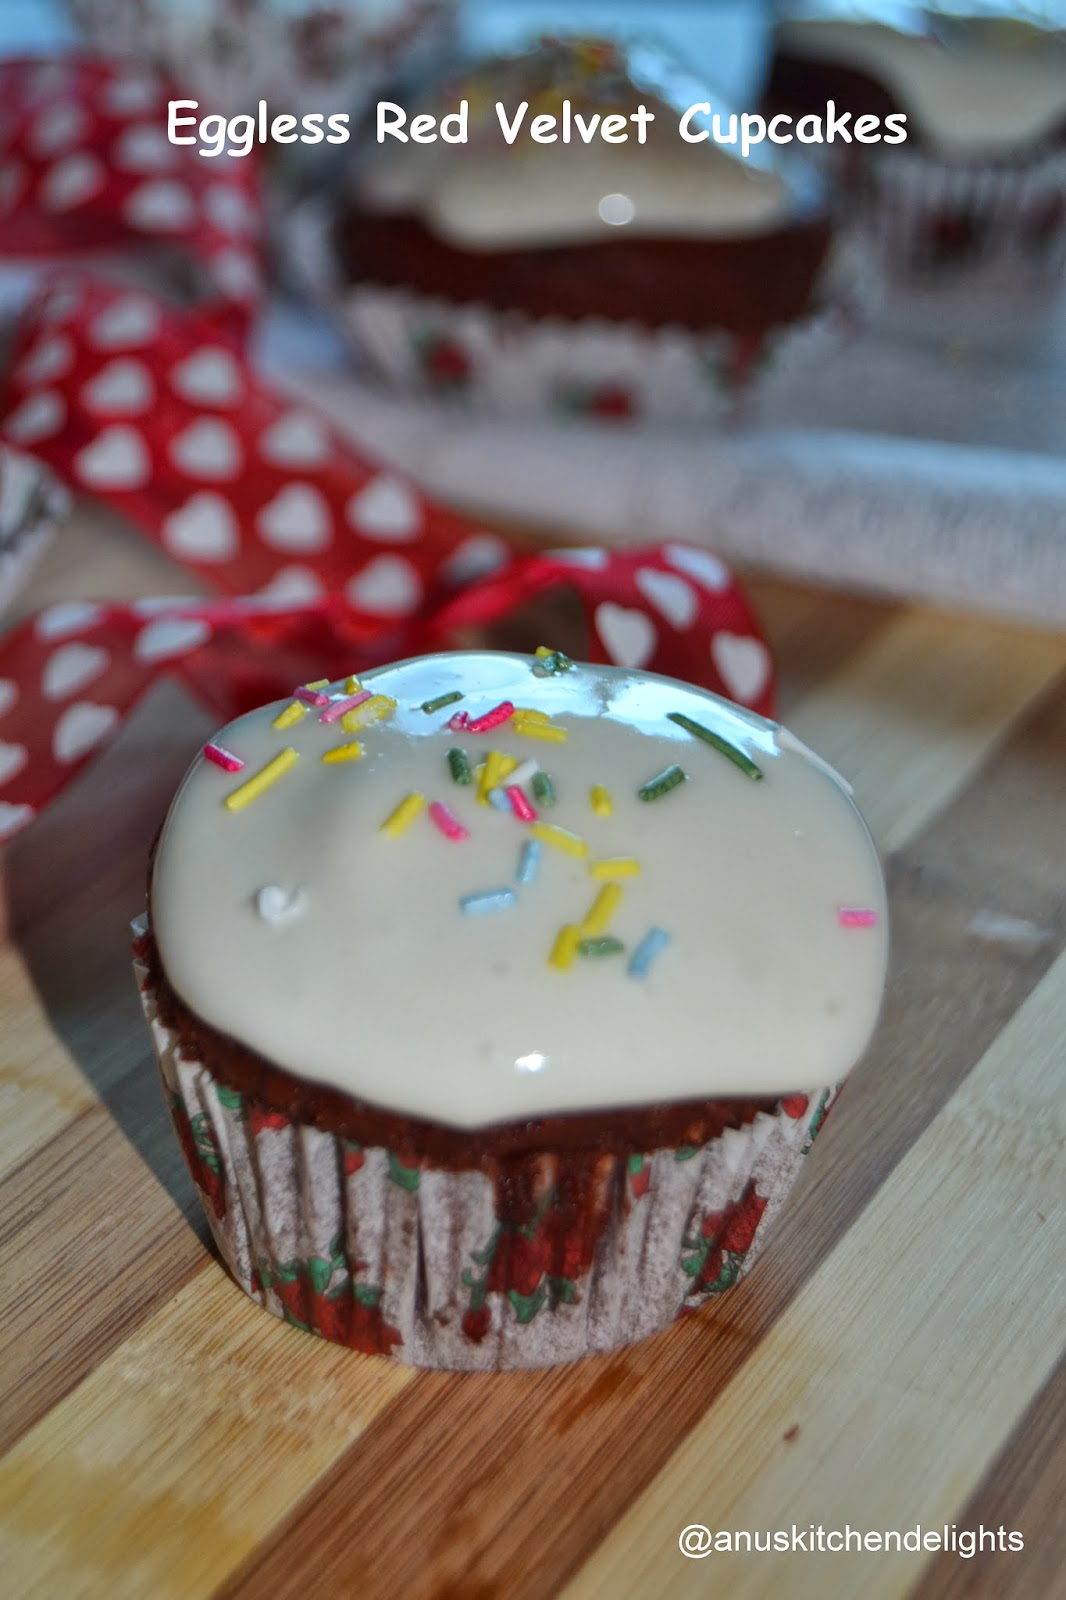 Eggless Red Velvet Cupcakes with Cream cheese frosting